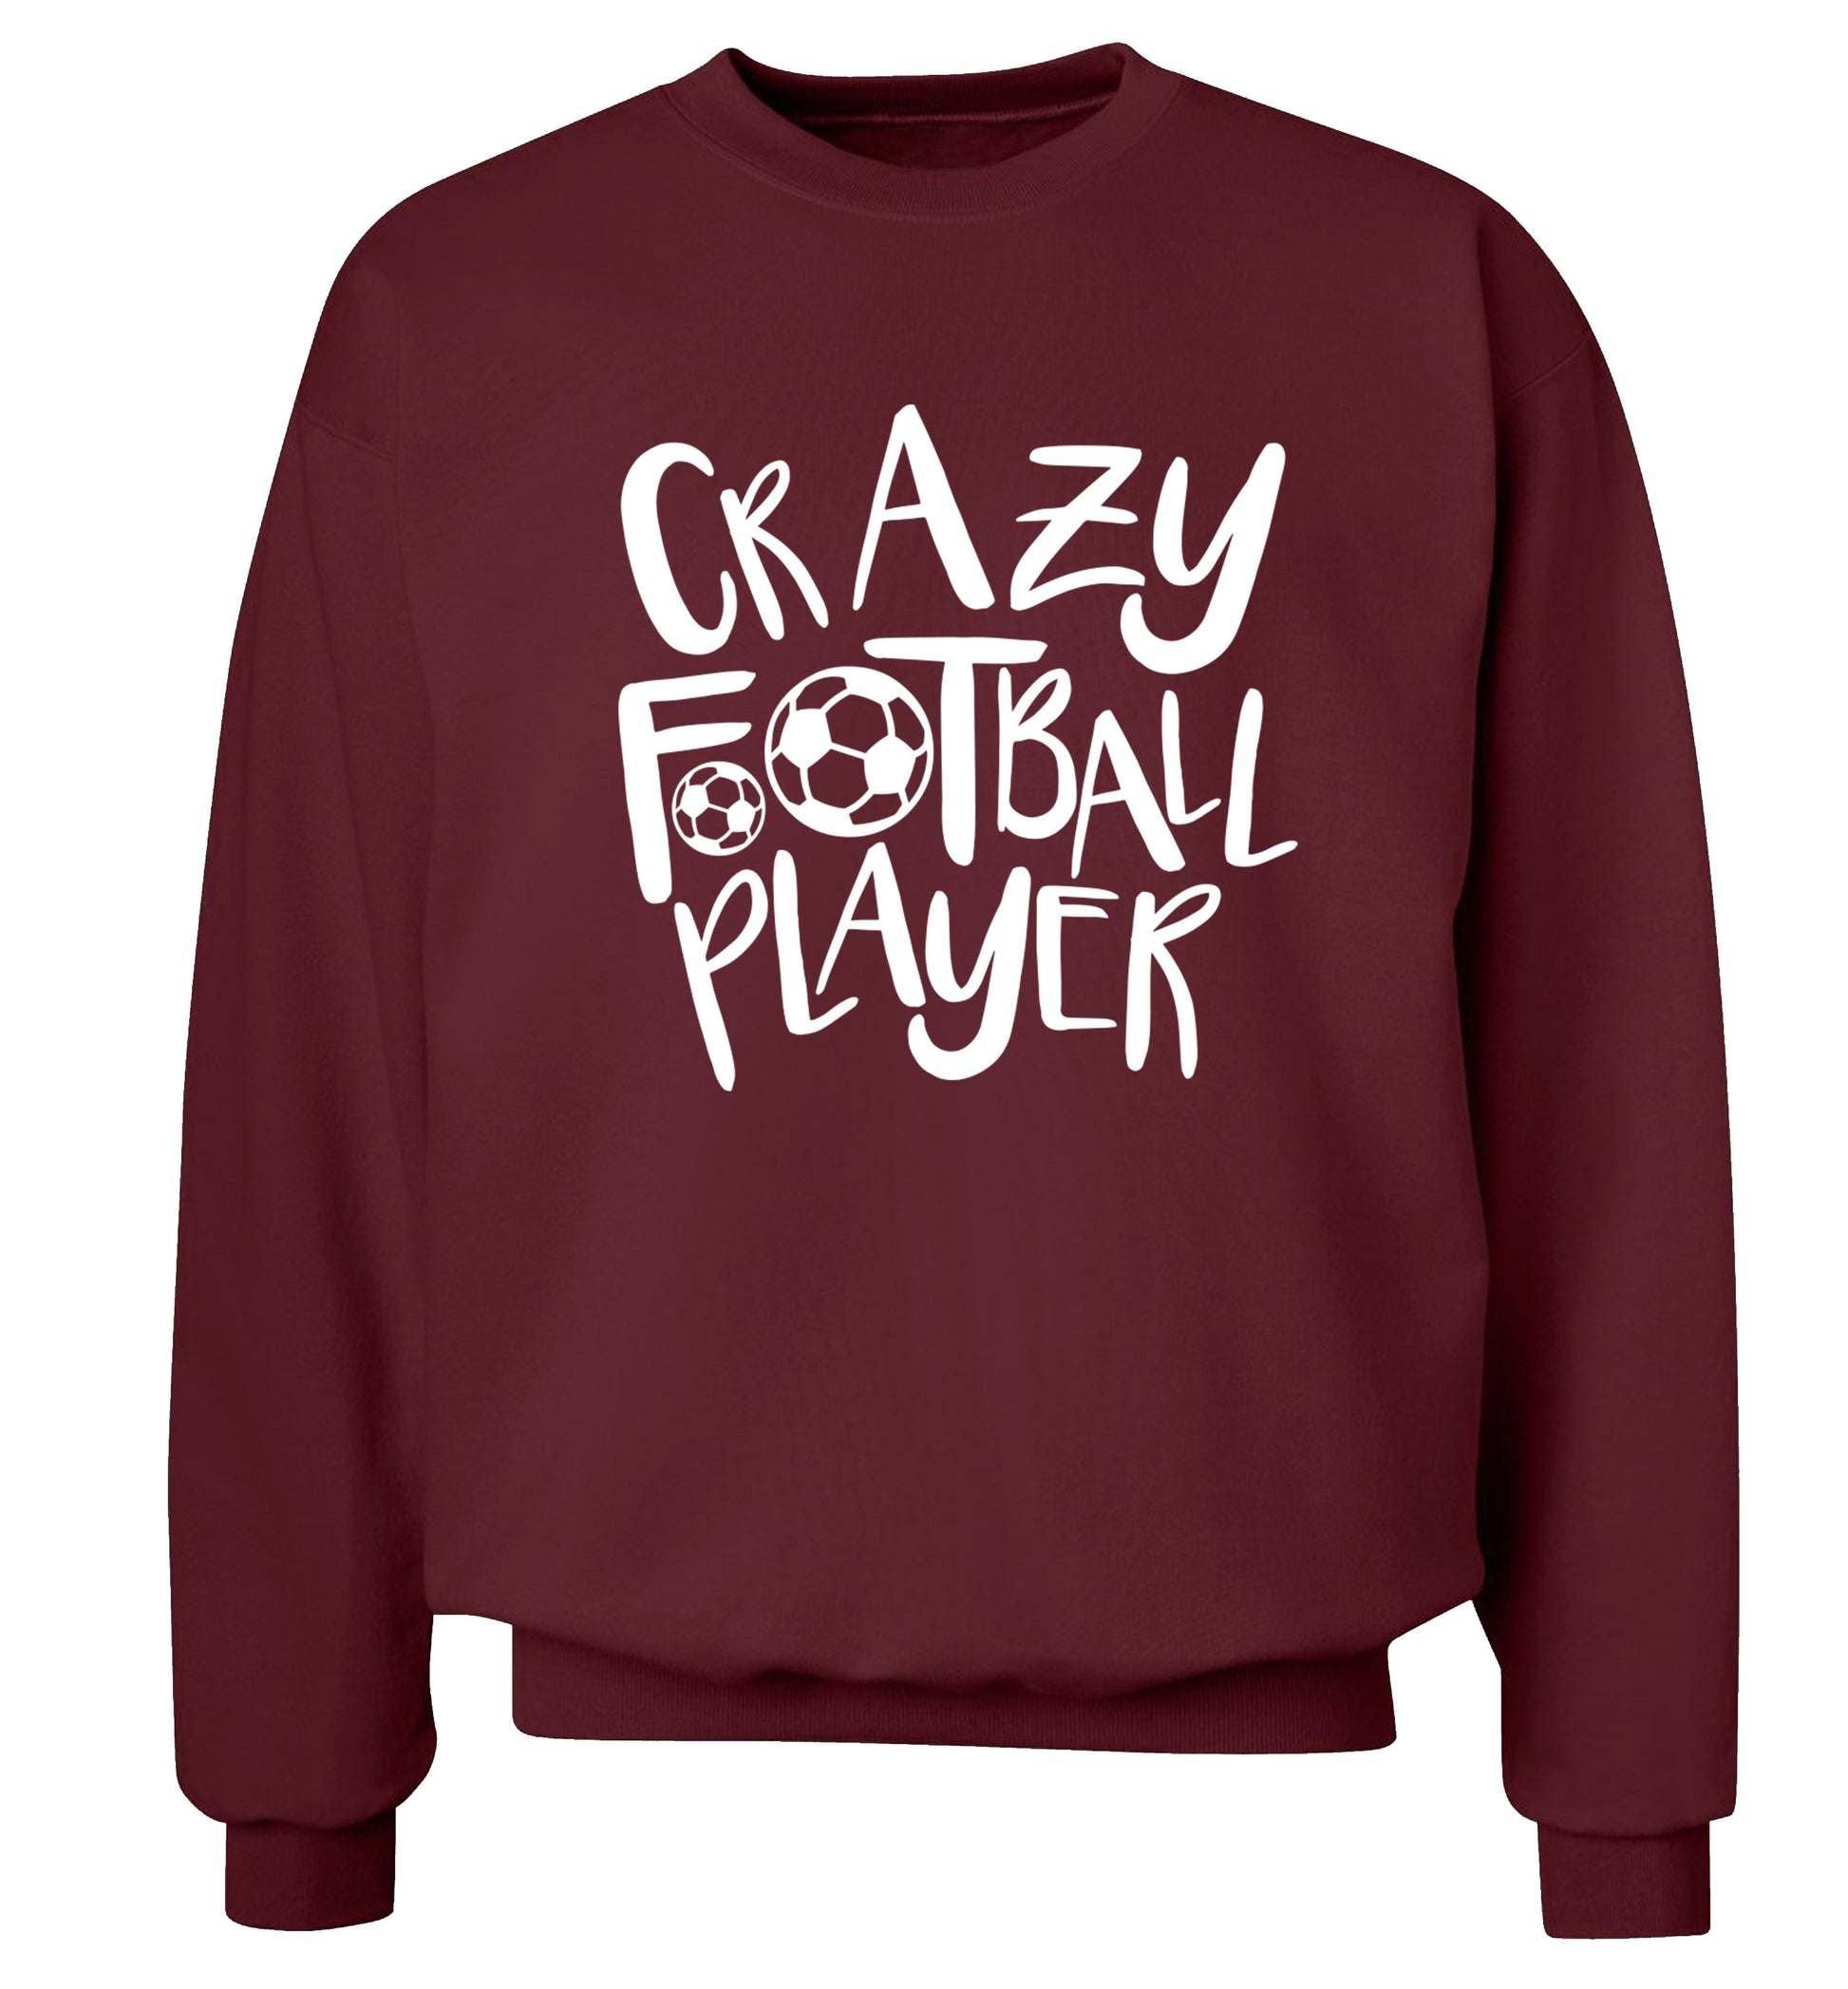 Crazy football player Adult's unisexmaroon Sweater 2XL